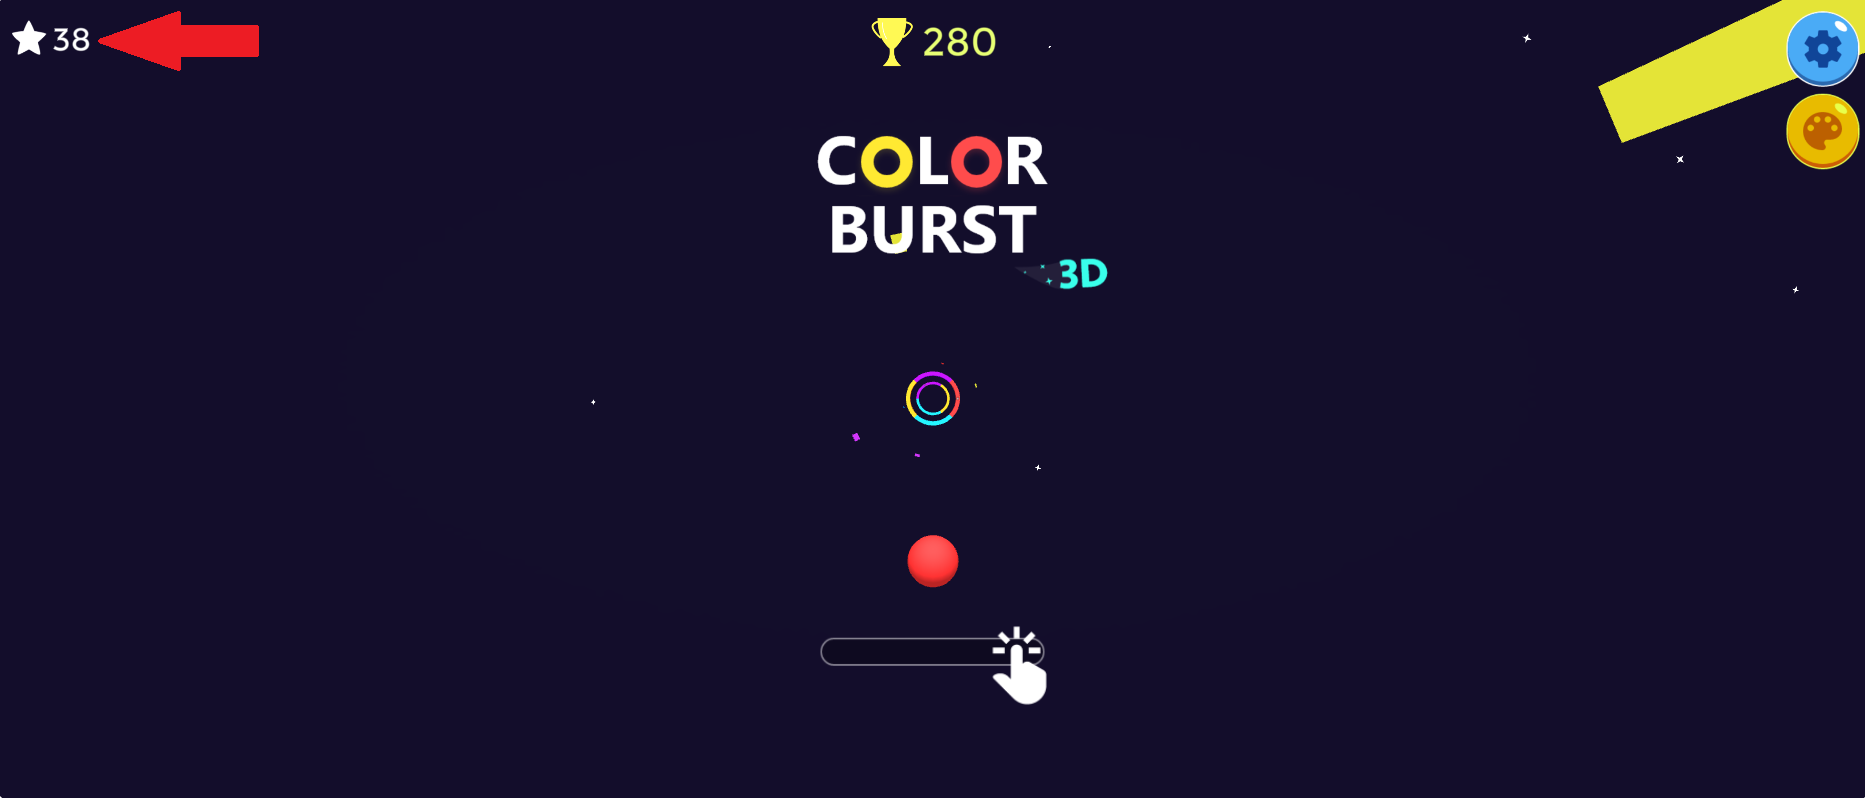 The start screen for the YouTube Playables game "Color Burst" with my saved high score shown in the corner.